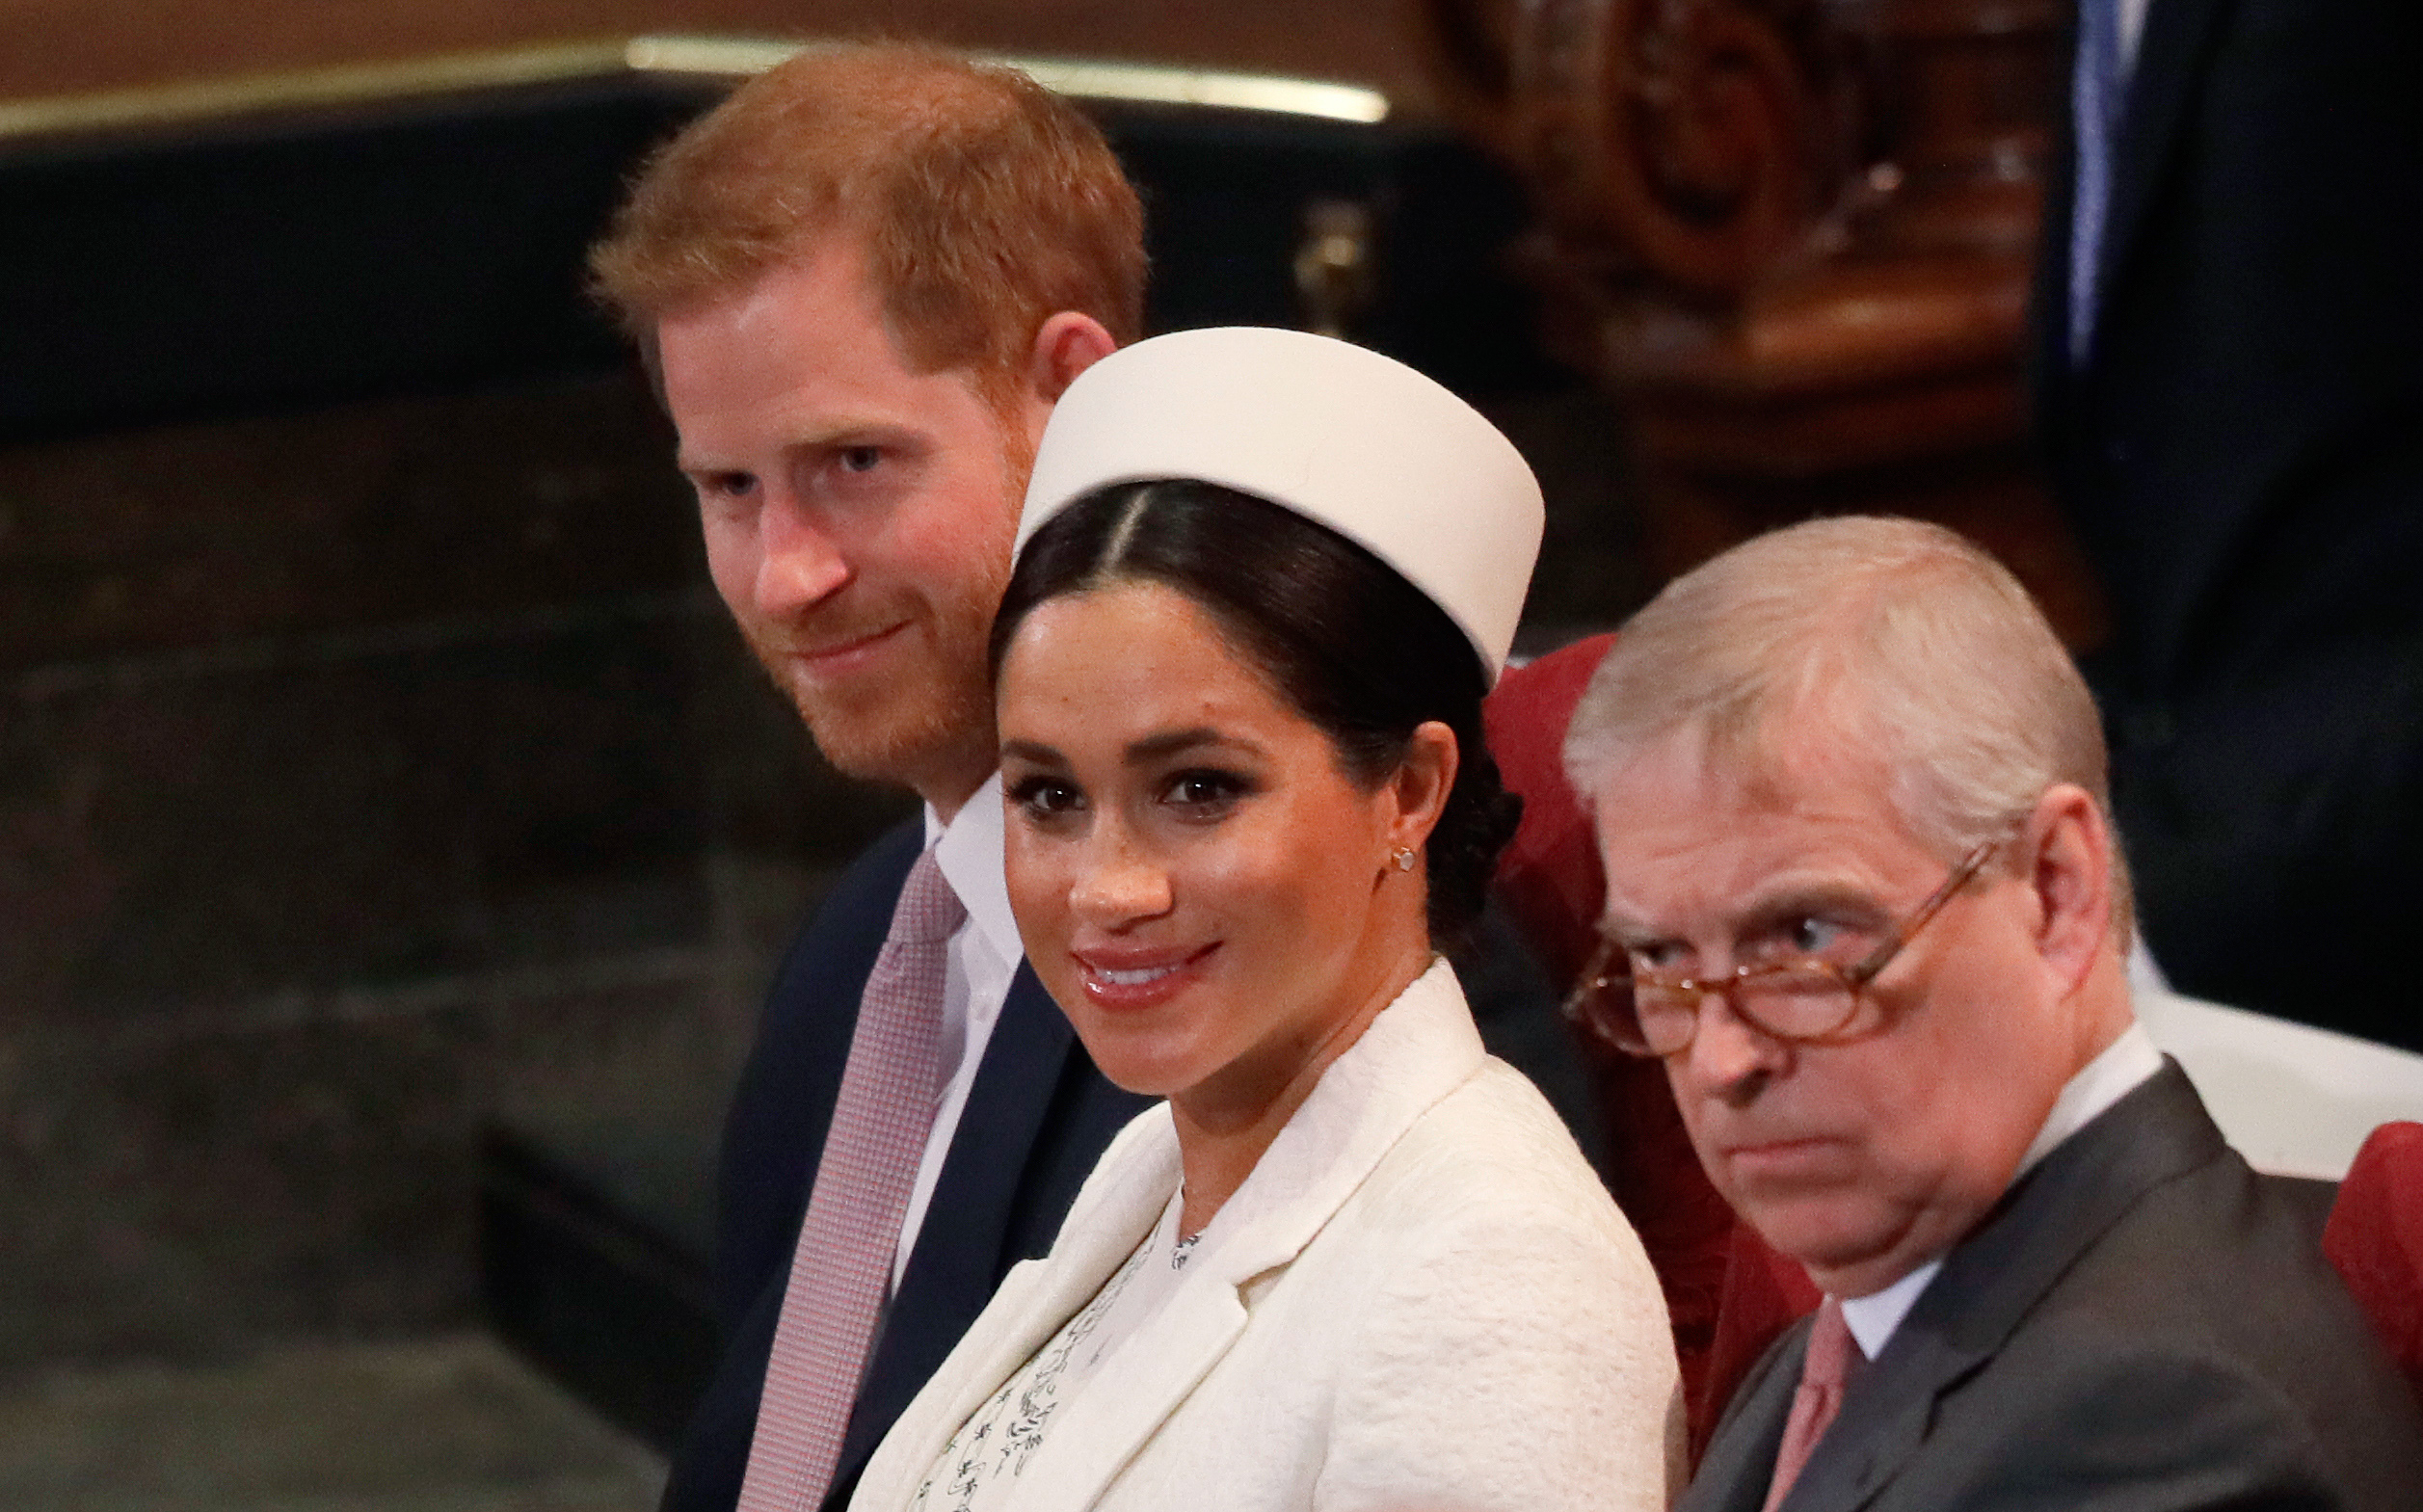 Prince Harry, Meghan Markle, and Prince Andrew seated next to each other during the Commonwealth Day service